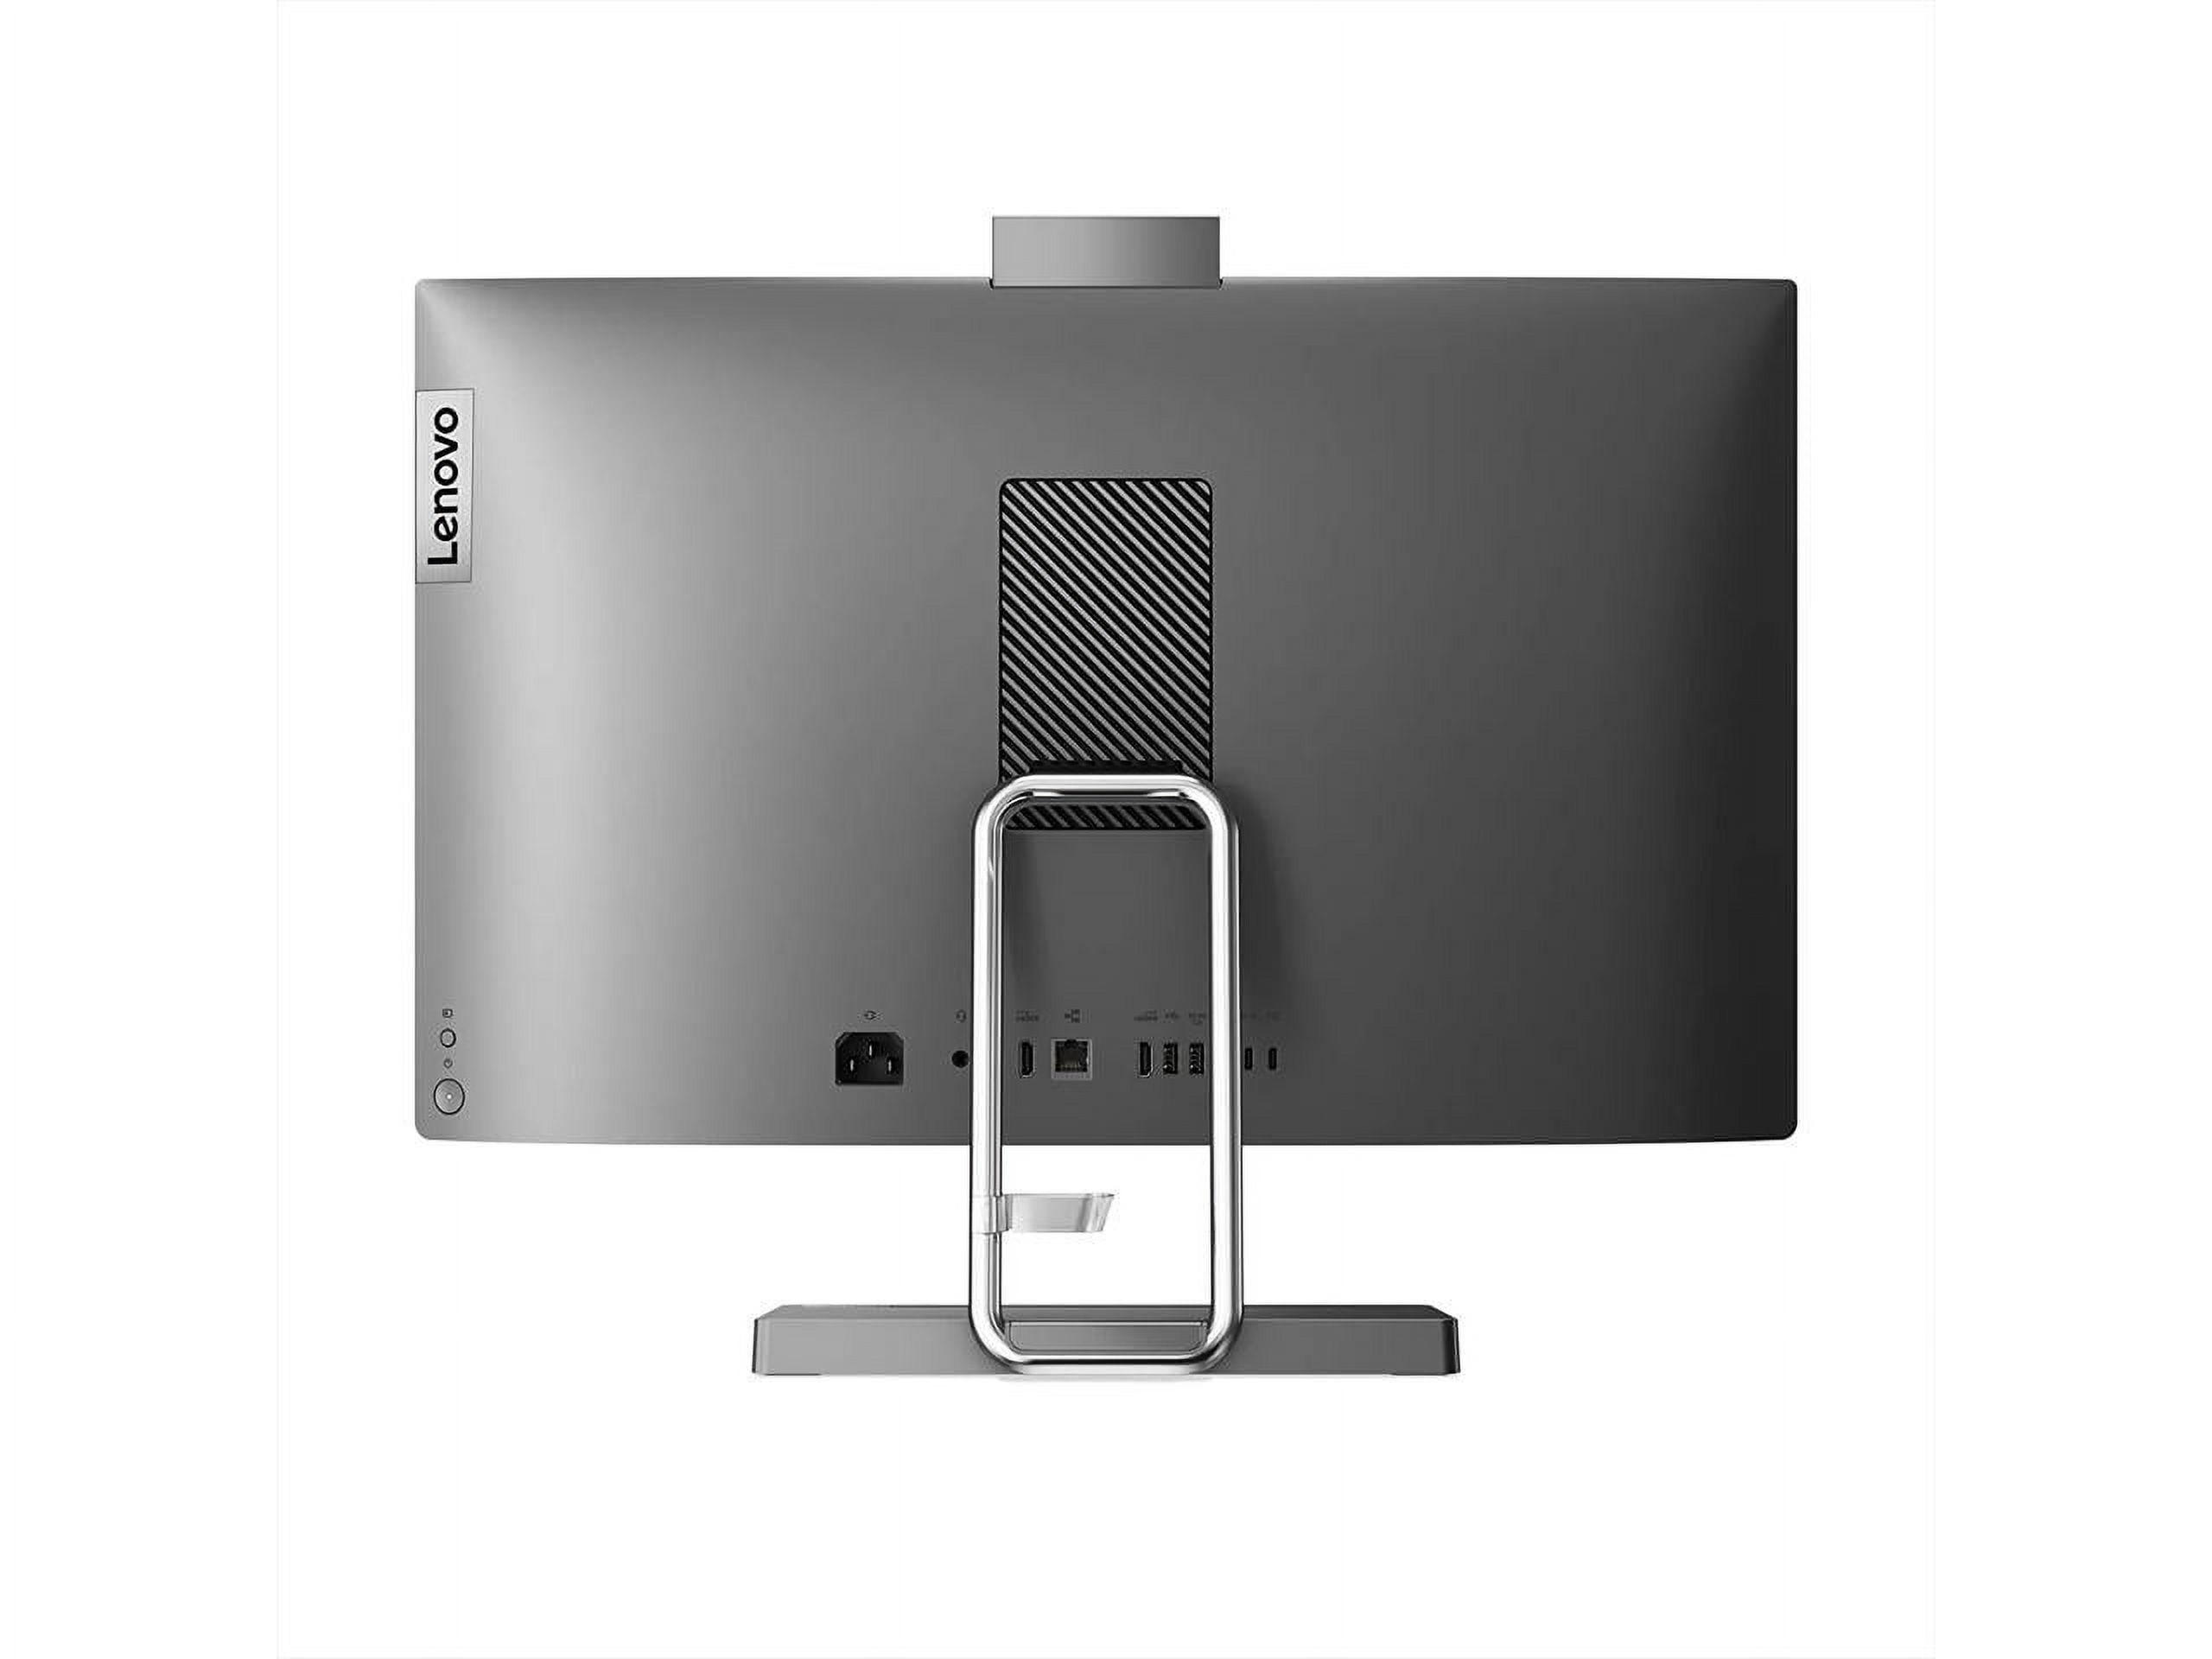 Lenovo IdeaCentre AIO 5i - 2022 - All-in-One Desktop - 27" QHD Touch Display - 5MP + IR Camera - Windows 11 Home - 8GB Memory - 256 GB Storage - Intel Core i7-12700H - Mouse & Keyboard Included - image 3 of 16